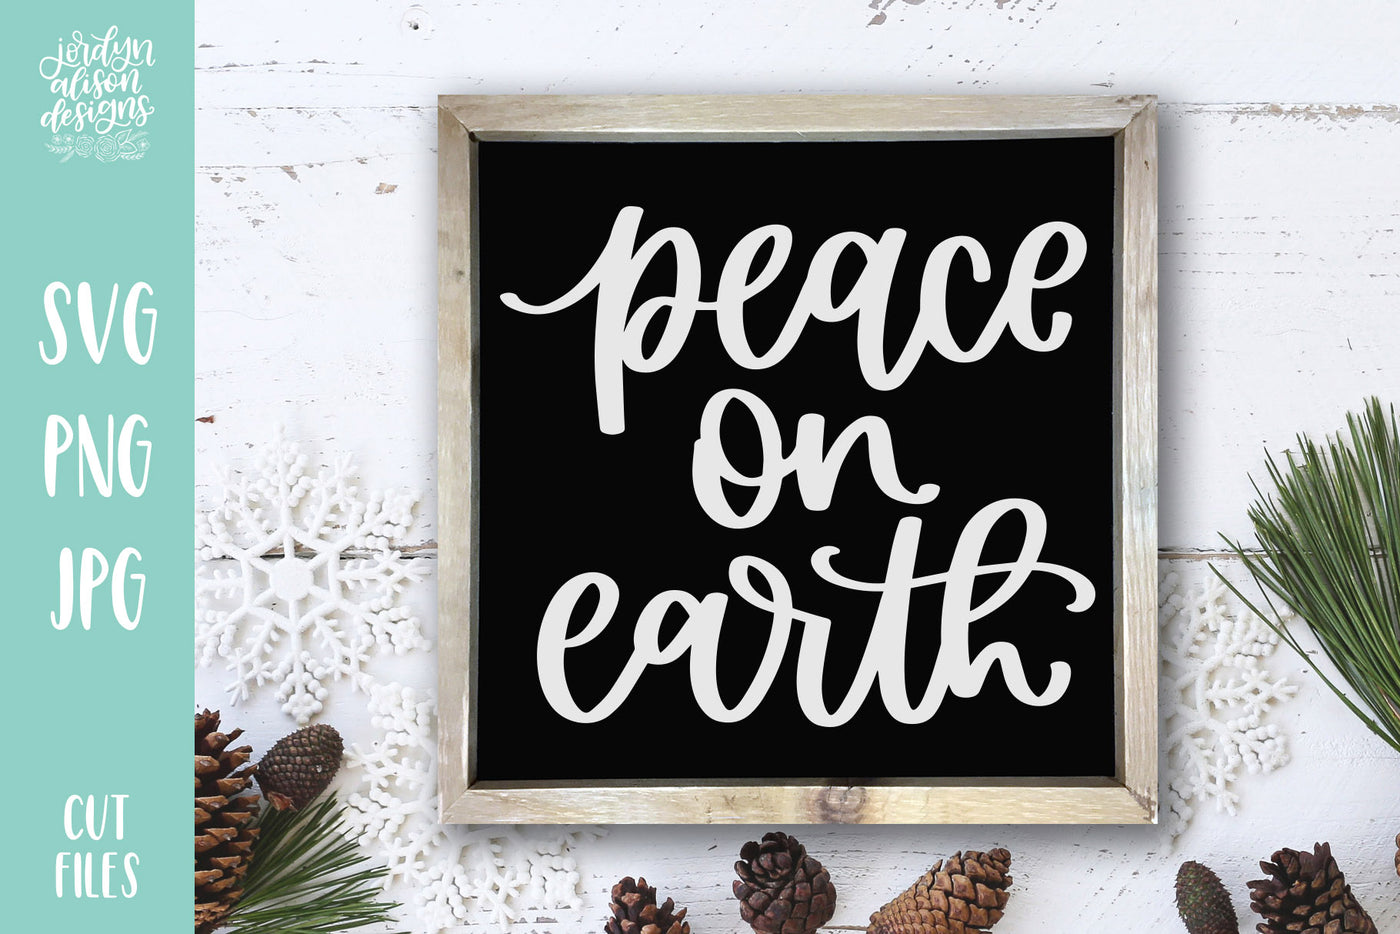 Square frame with handwritten text on chalkboard "Peace on Earth"